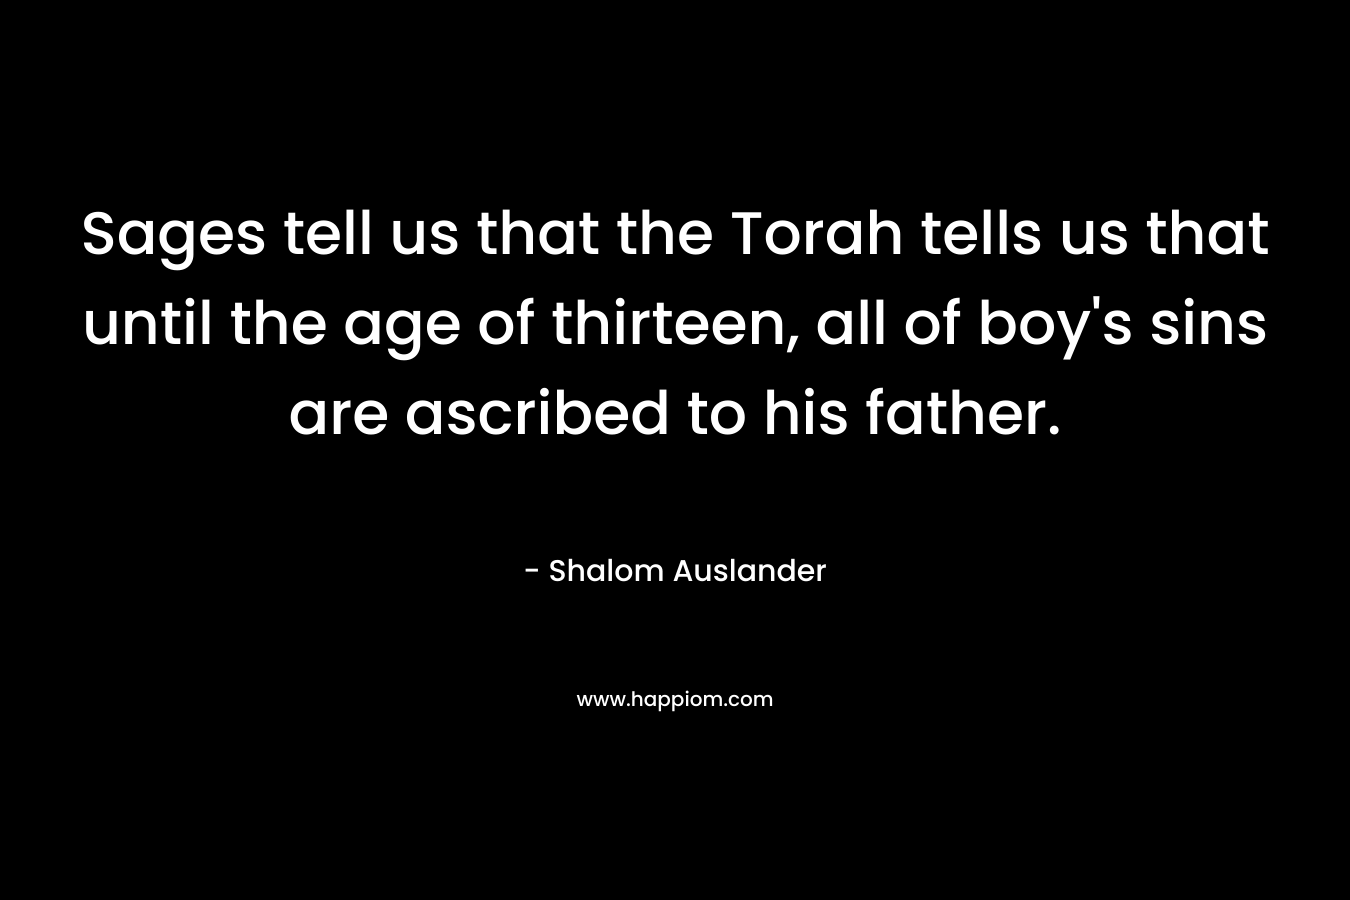 Sages tell us that the Torah tells us that until the age of thirteen, all of boy’s sins are ascribed to his father. – Shalom Auslander